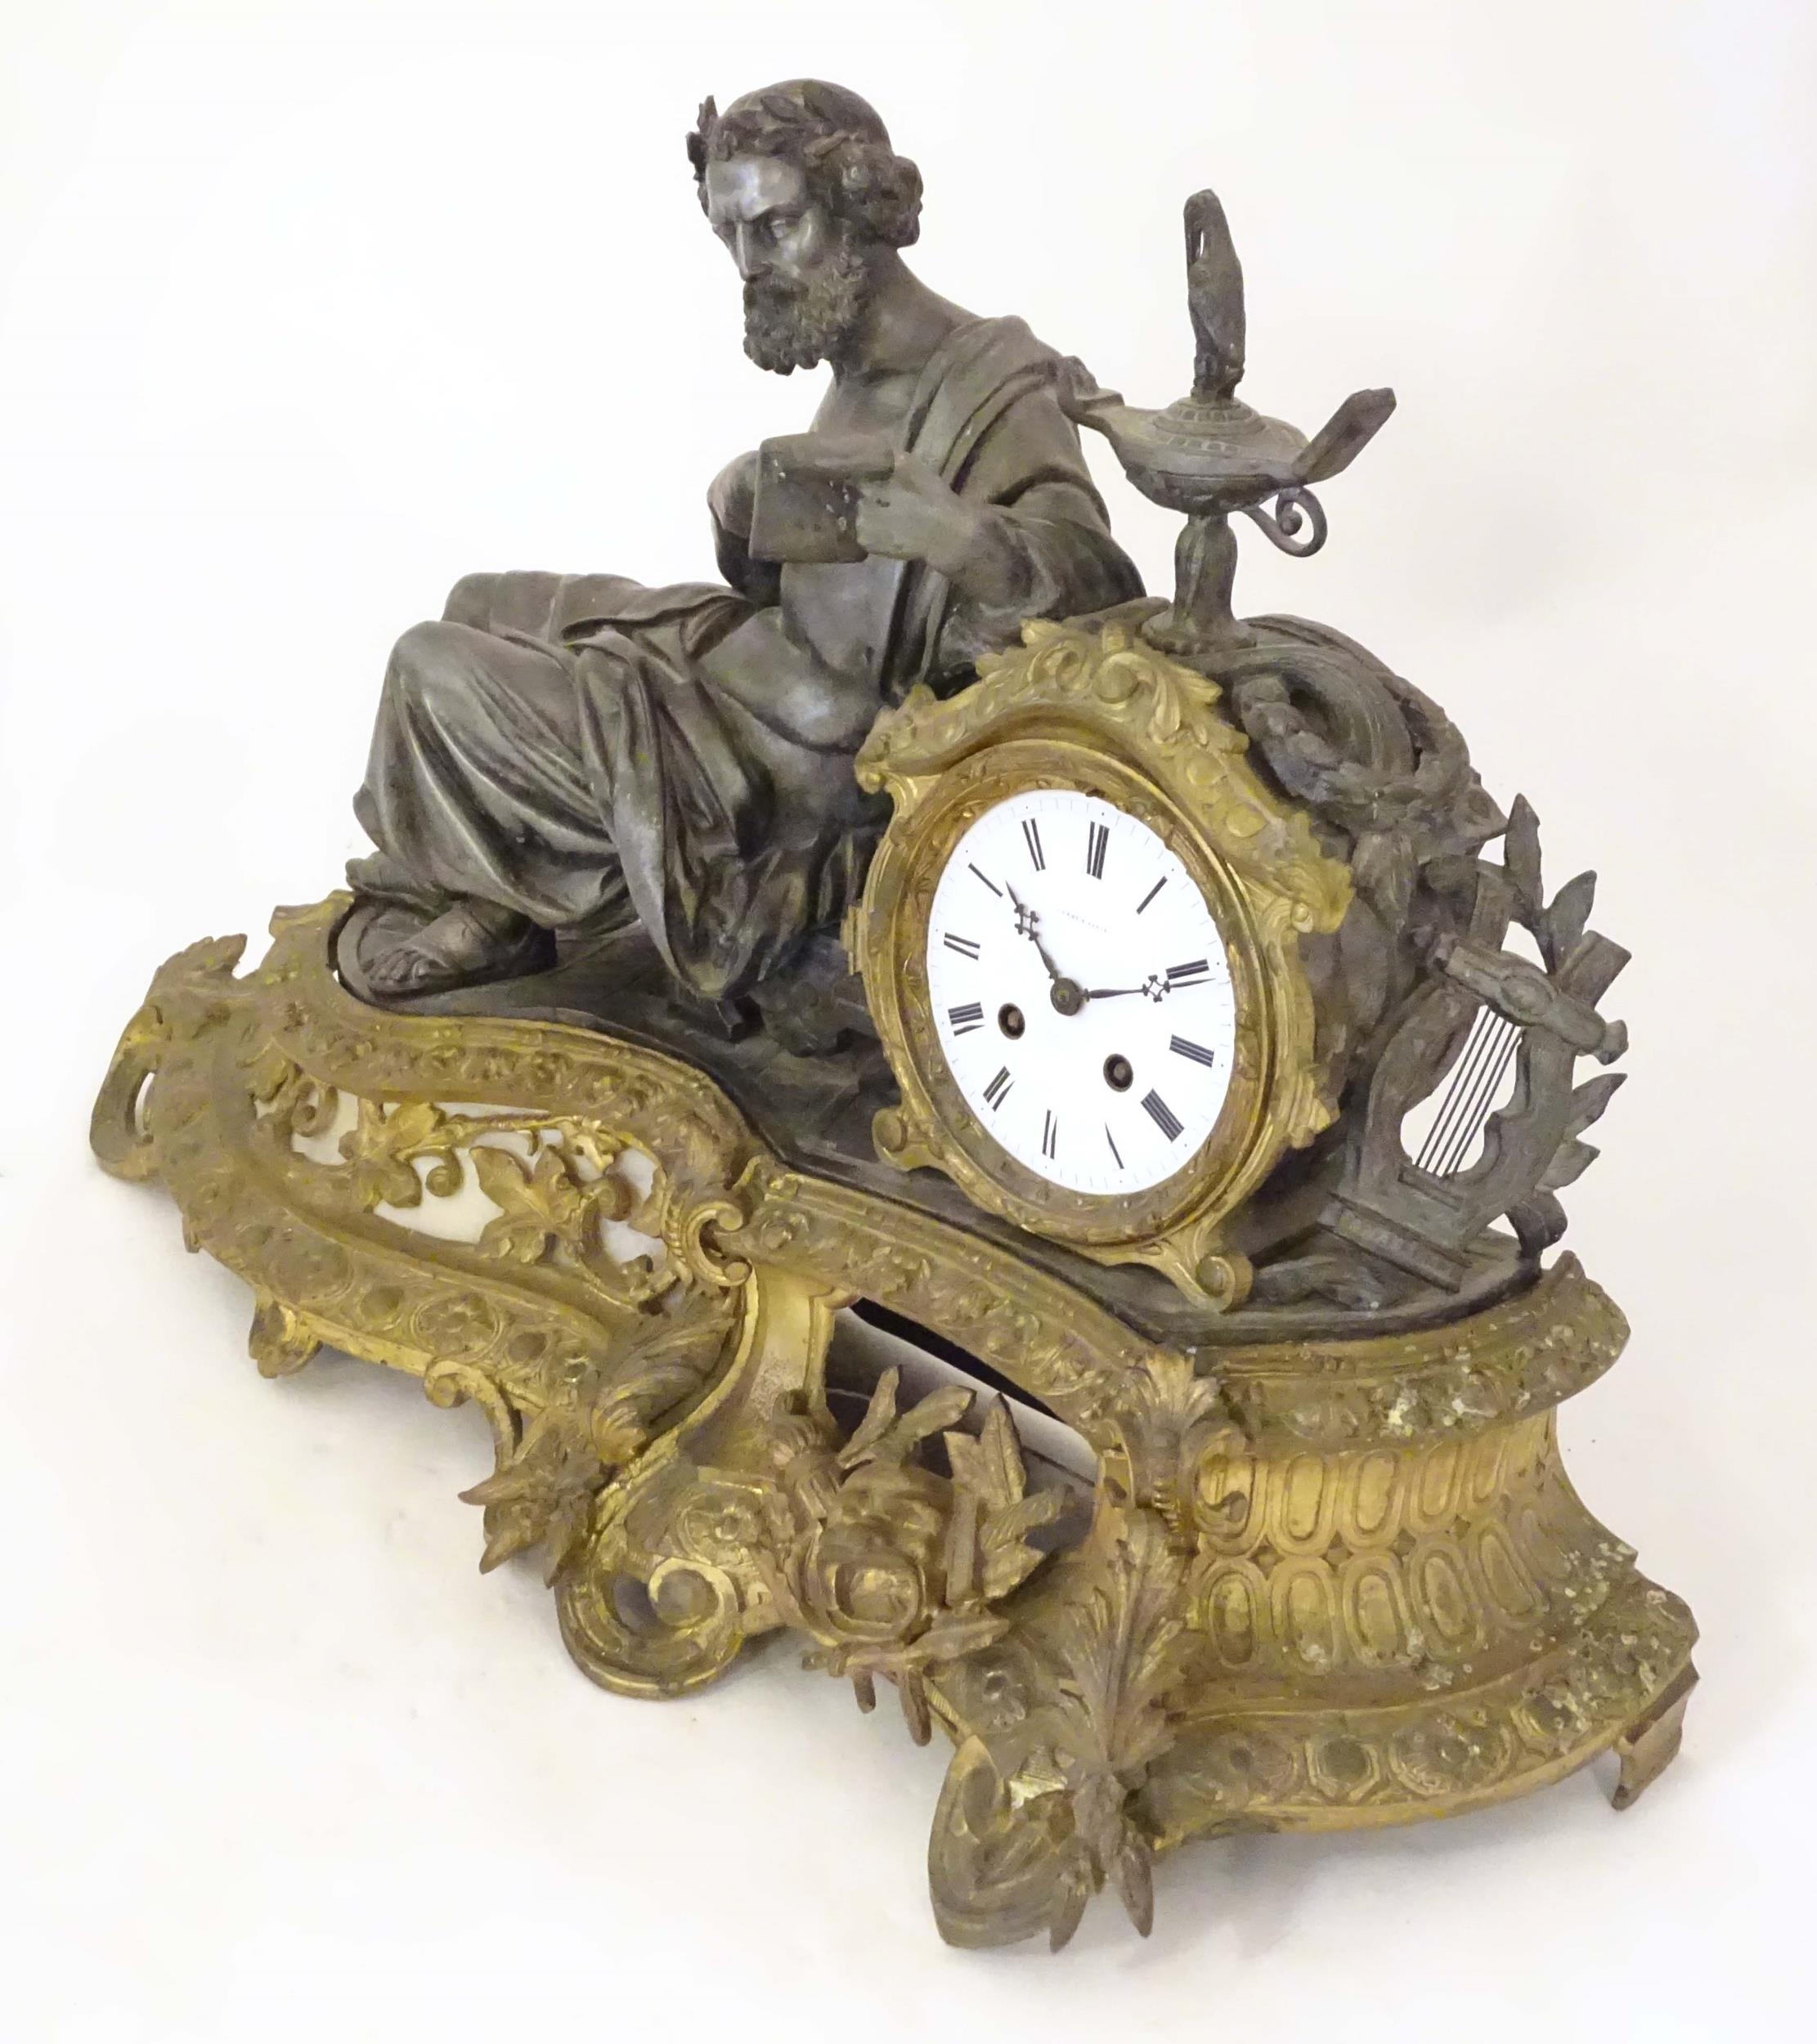 A 19thC French mantle clock with white enamel dial and cast classical scholar figural decoration. - Image 3 of 12